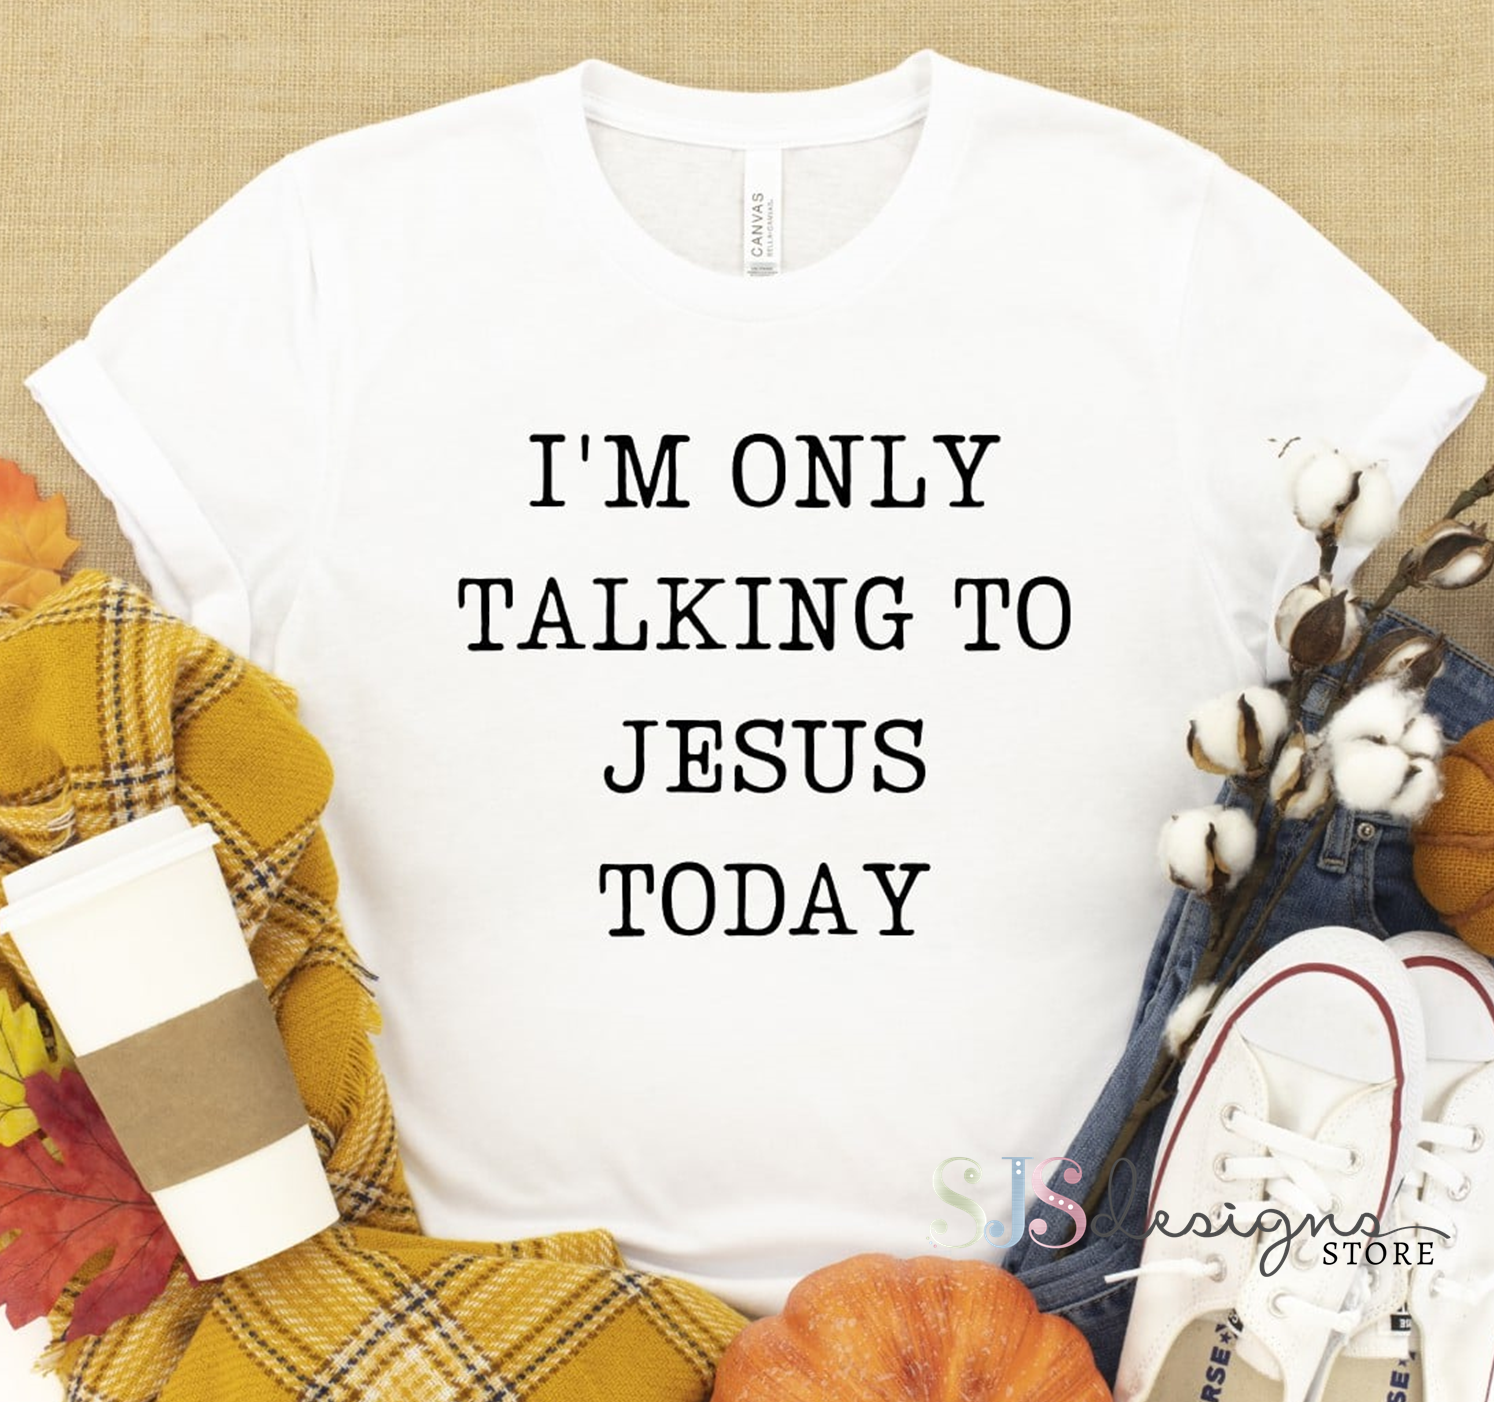 I'm Only Talking to Jesus Today-2 Shirt